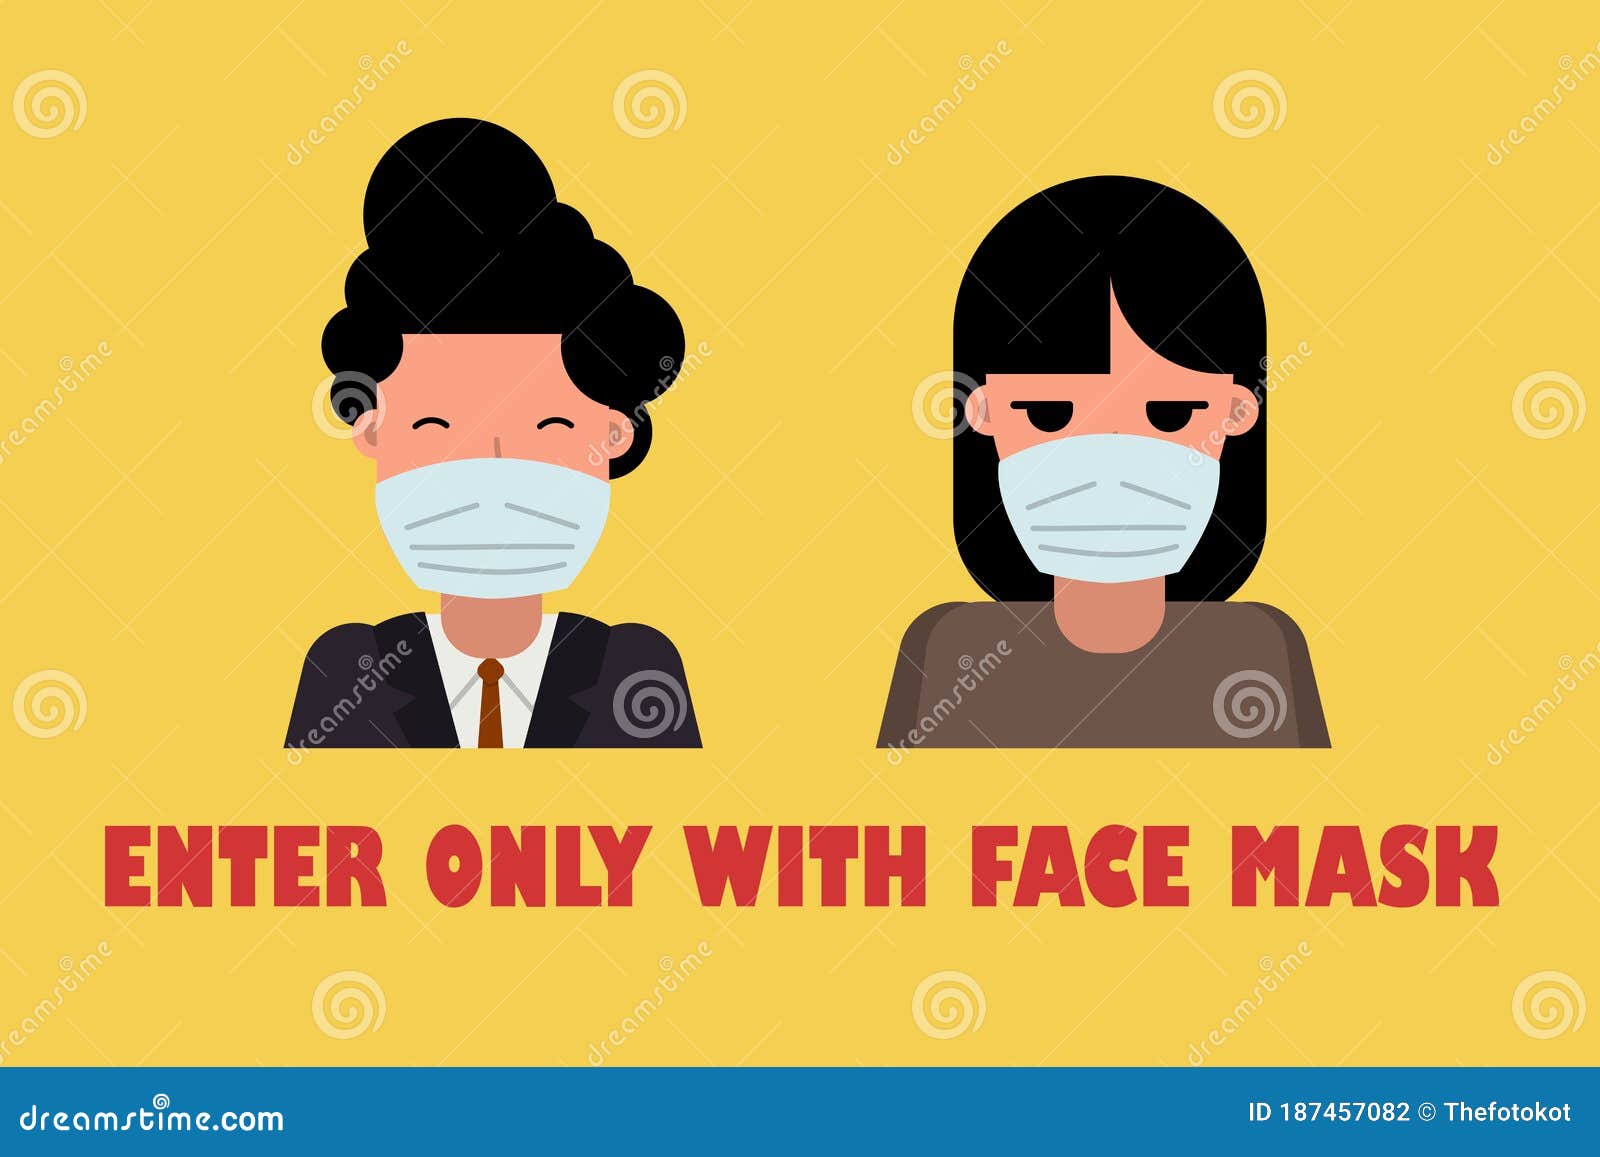 Download Covid Wear Mask Yellow Stock Illustrations 244 Covid Wear Mask Yellow Stock Illustrations Vectors Clipart Dreamstime PSD Mockup Templates